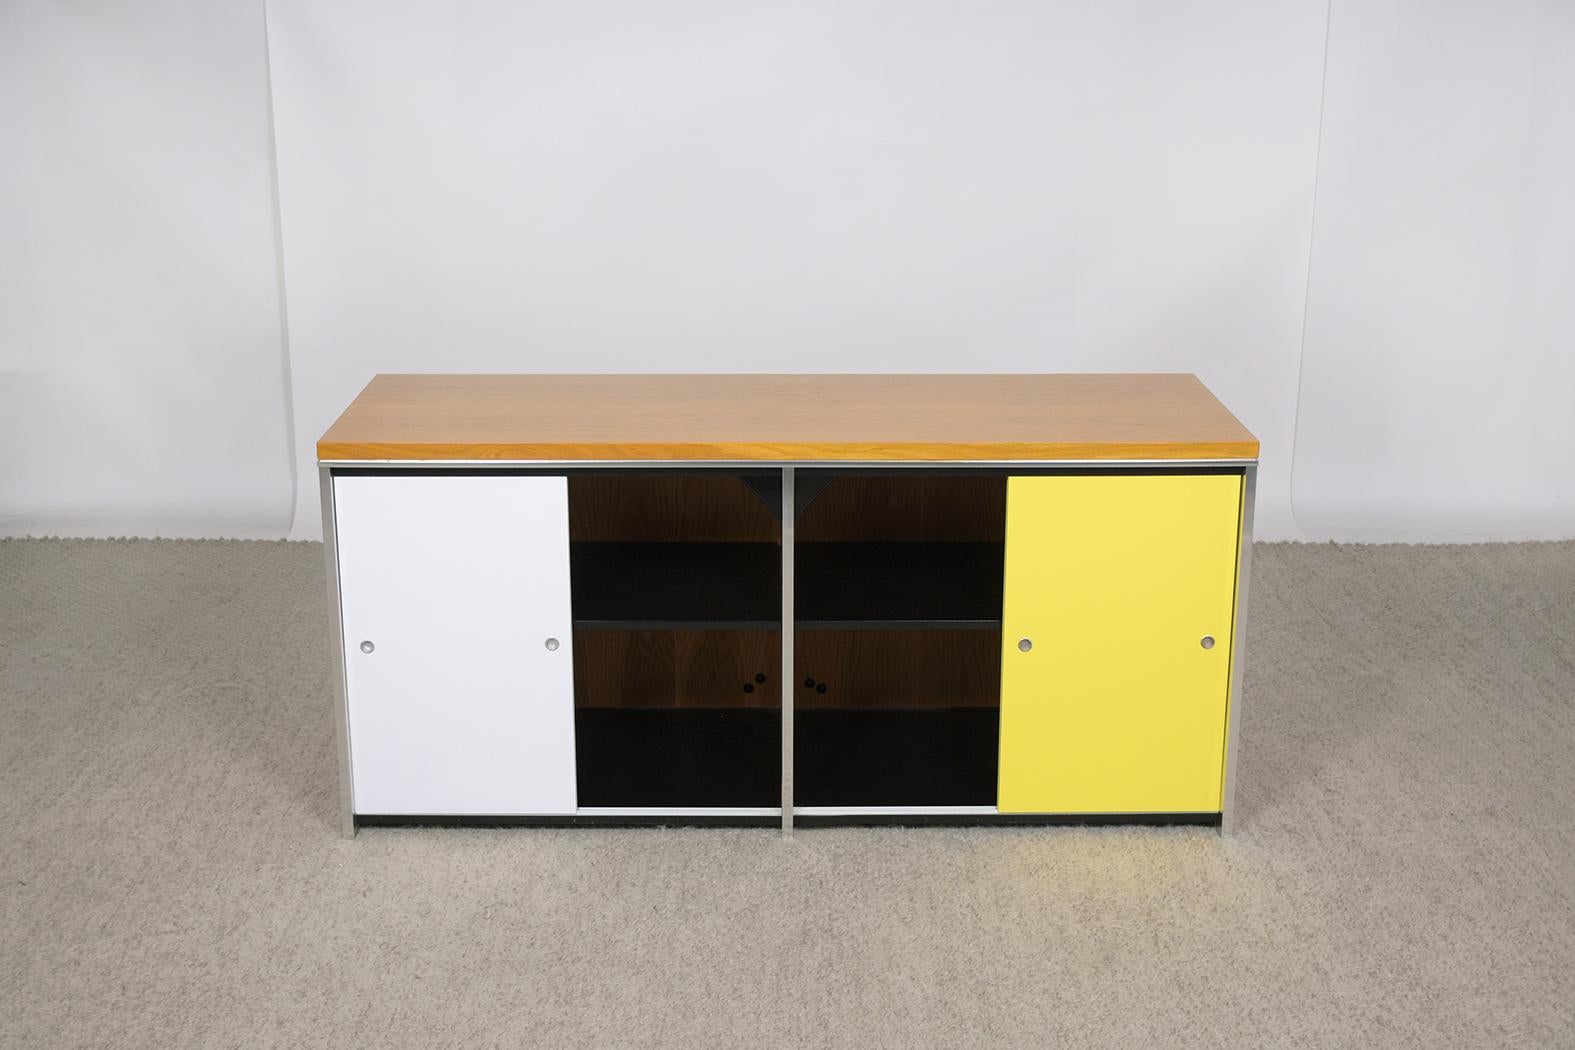 Retro Chic: Vintage 1970s Danish Mid-Century Credenza with White & Yellow Finish In Good Condition For Sale In Los Angeles, CA